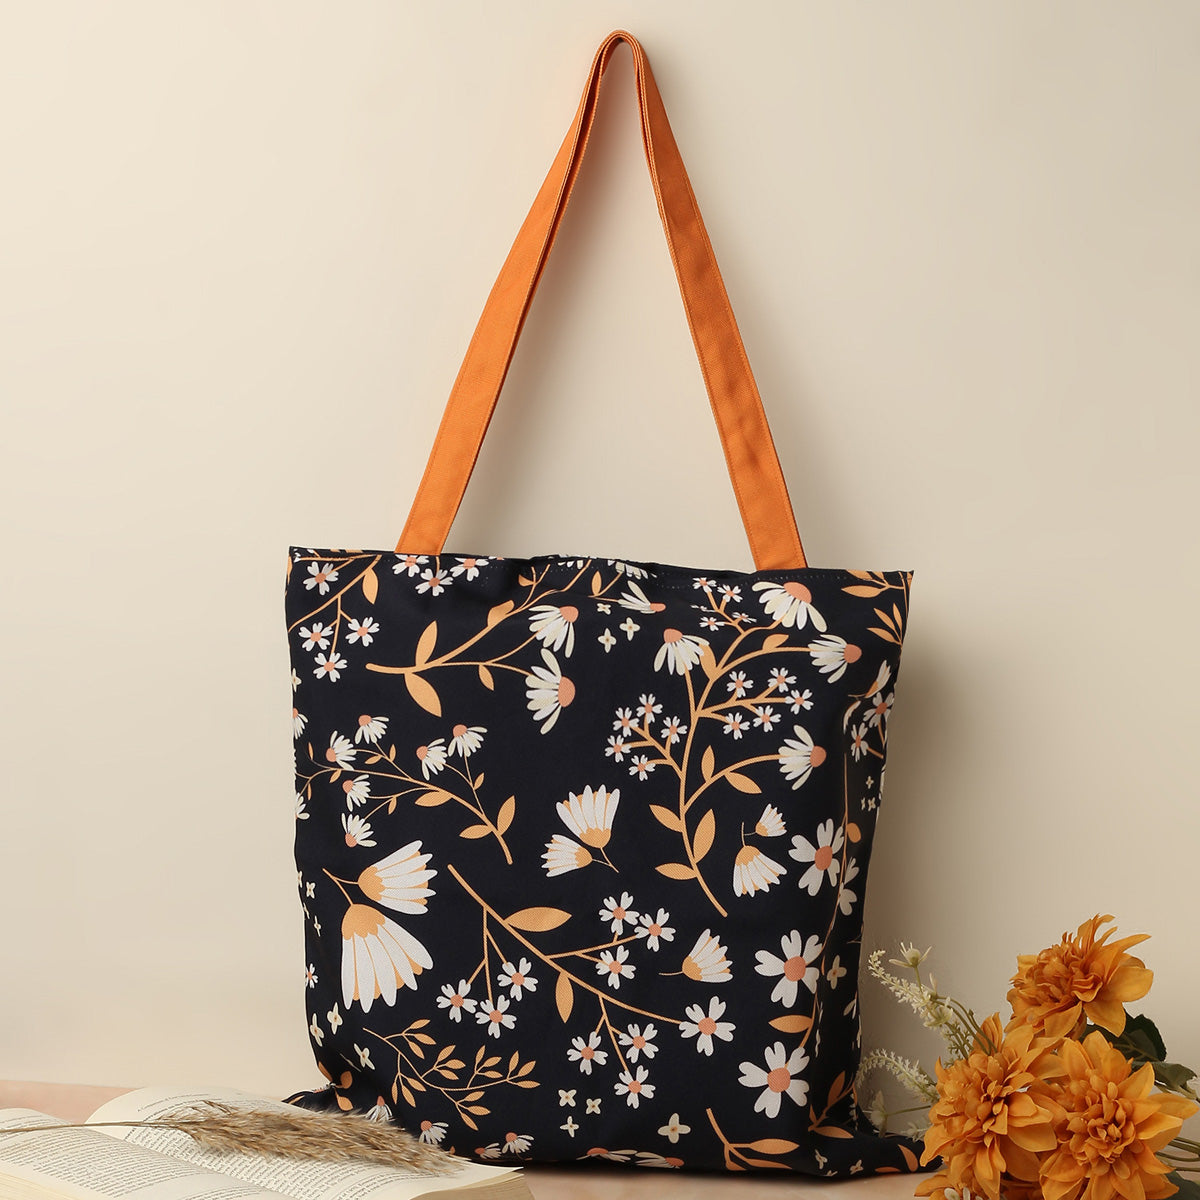 A black floral tote bag with orange straps leaning against a light beige background next to a bunch of orange flowers and an open book.